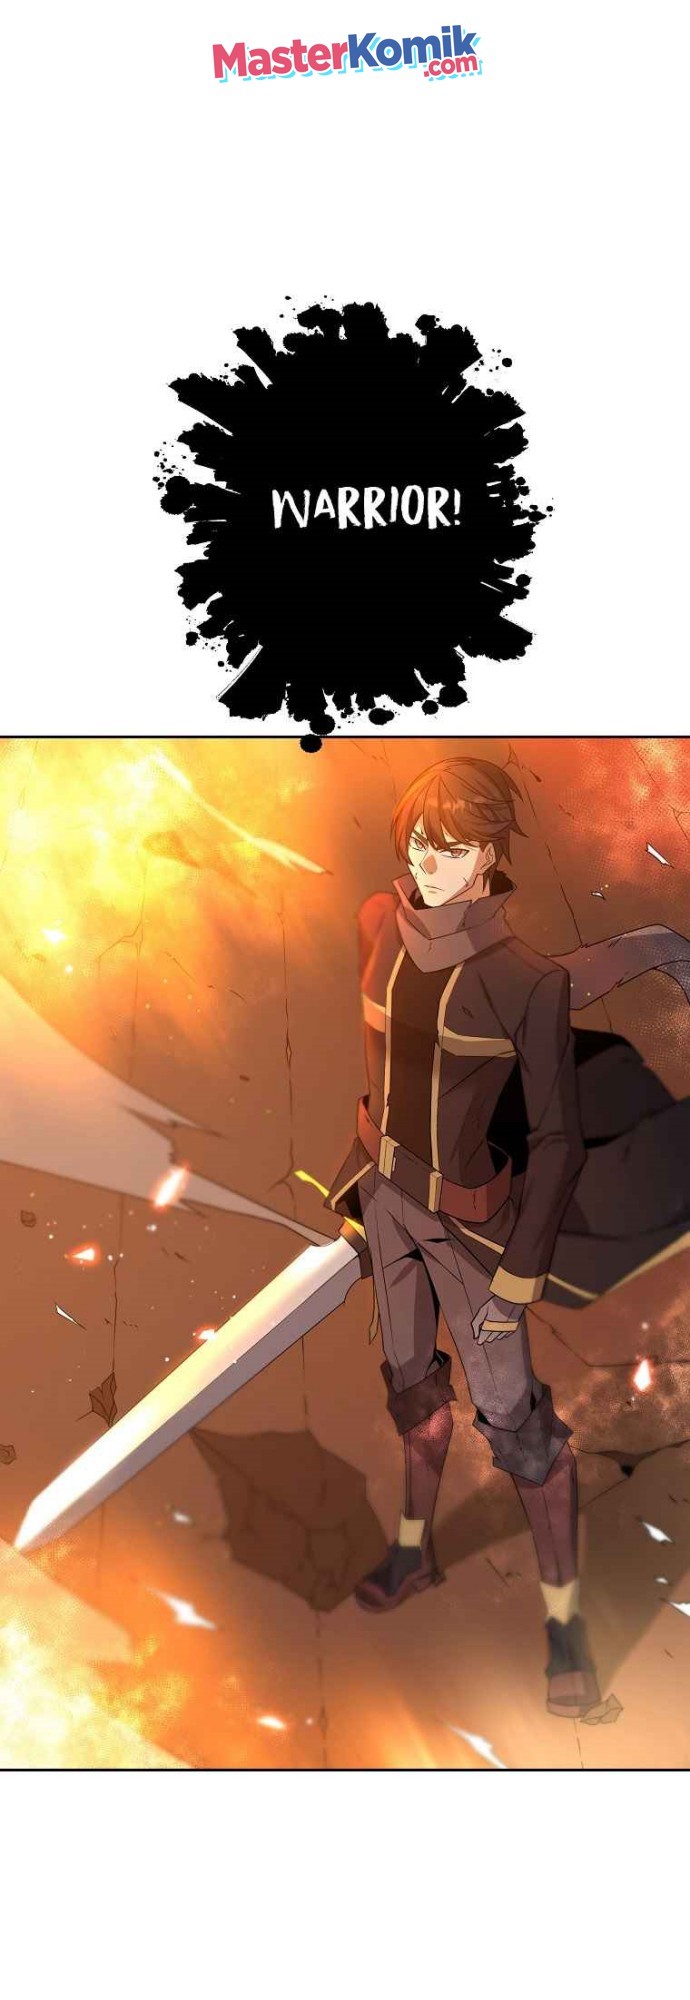 The Lazy Swordmaster Chapter 1